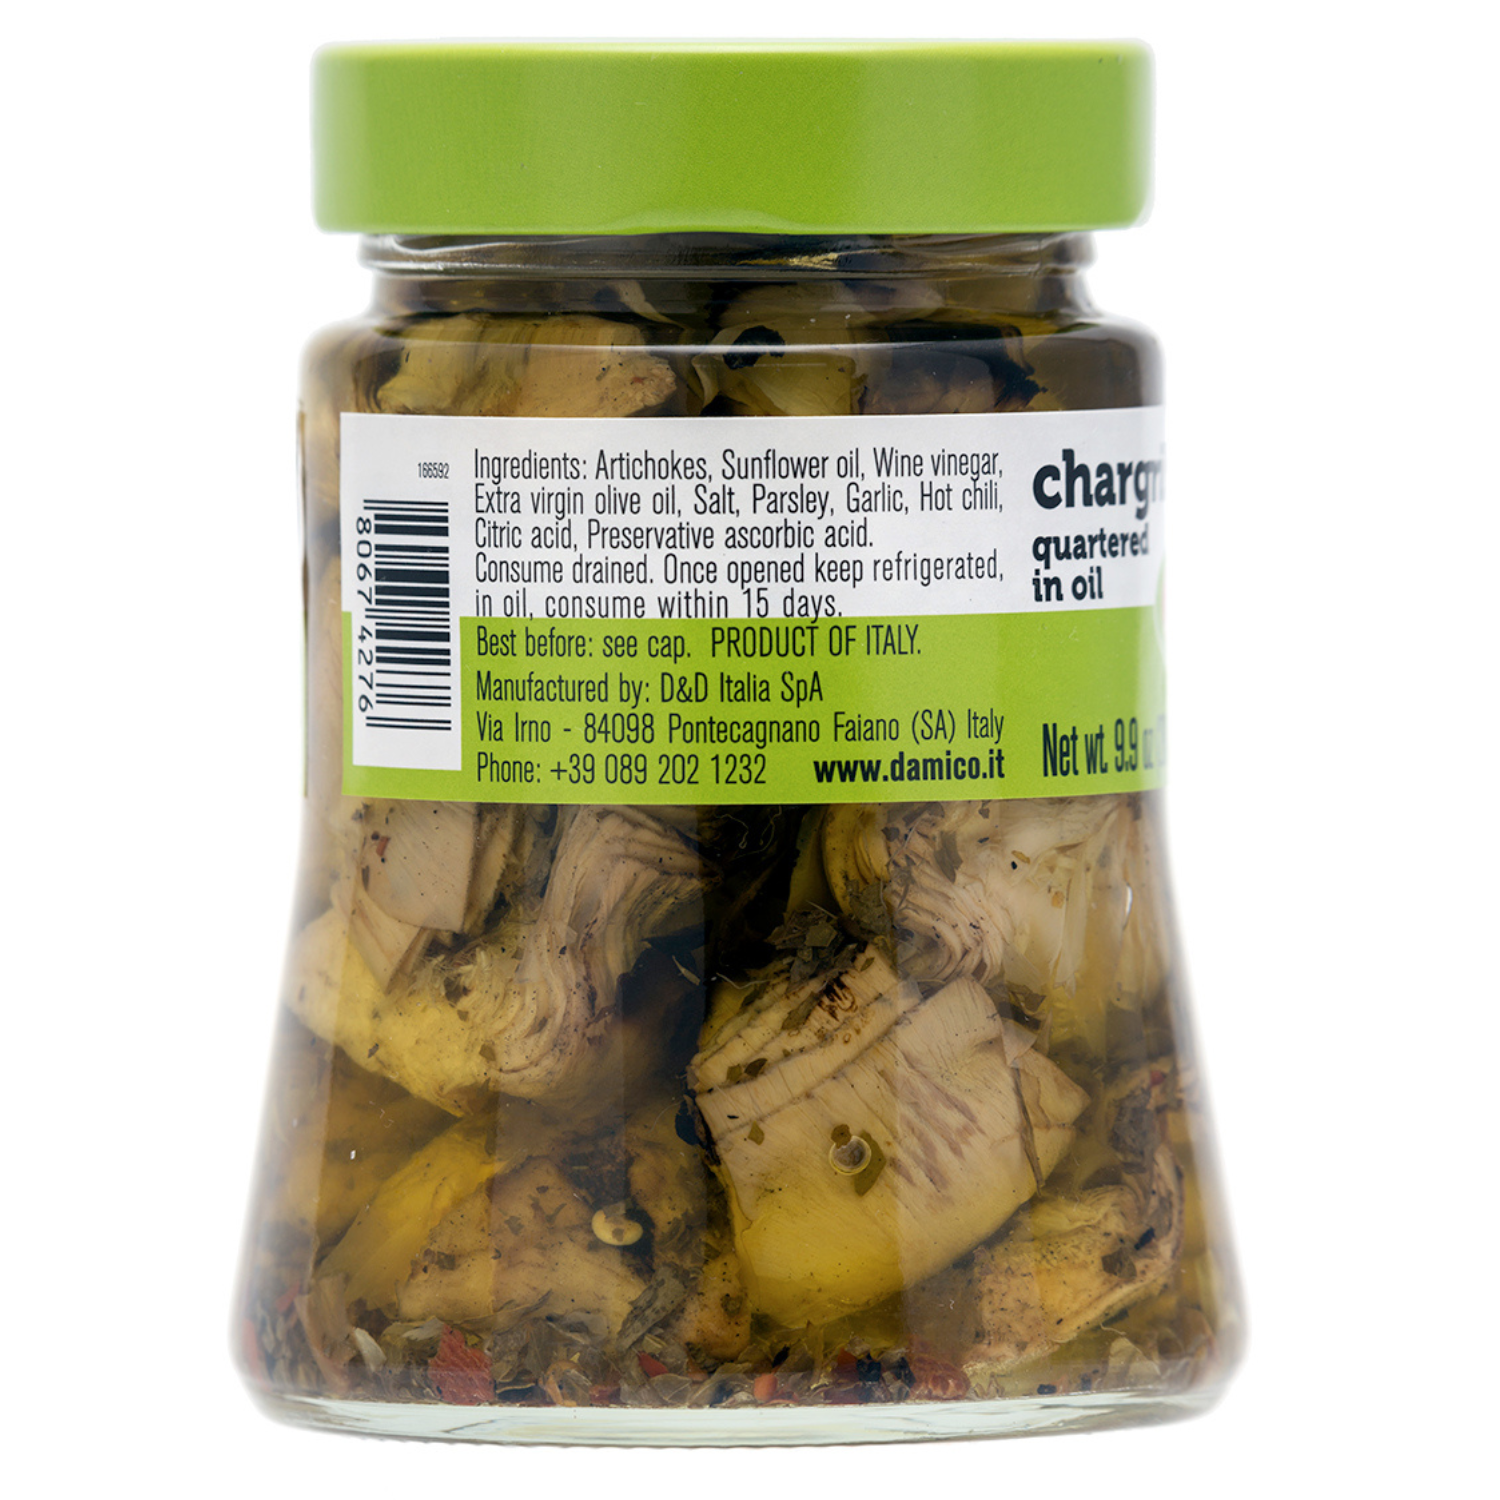 Fratelli D'Amico Chargrilled Artichokes Quartered in Oil. Net wt. 9.9oz (280g)